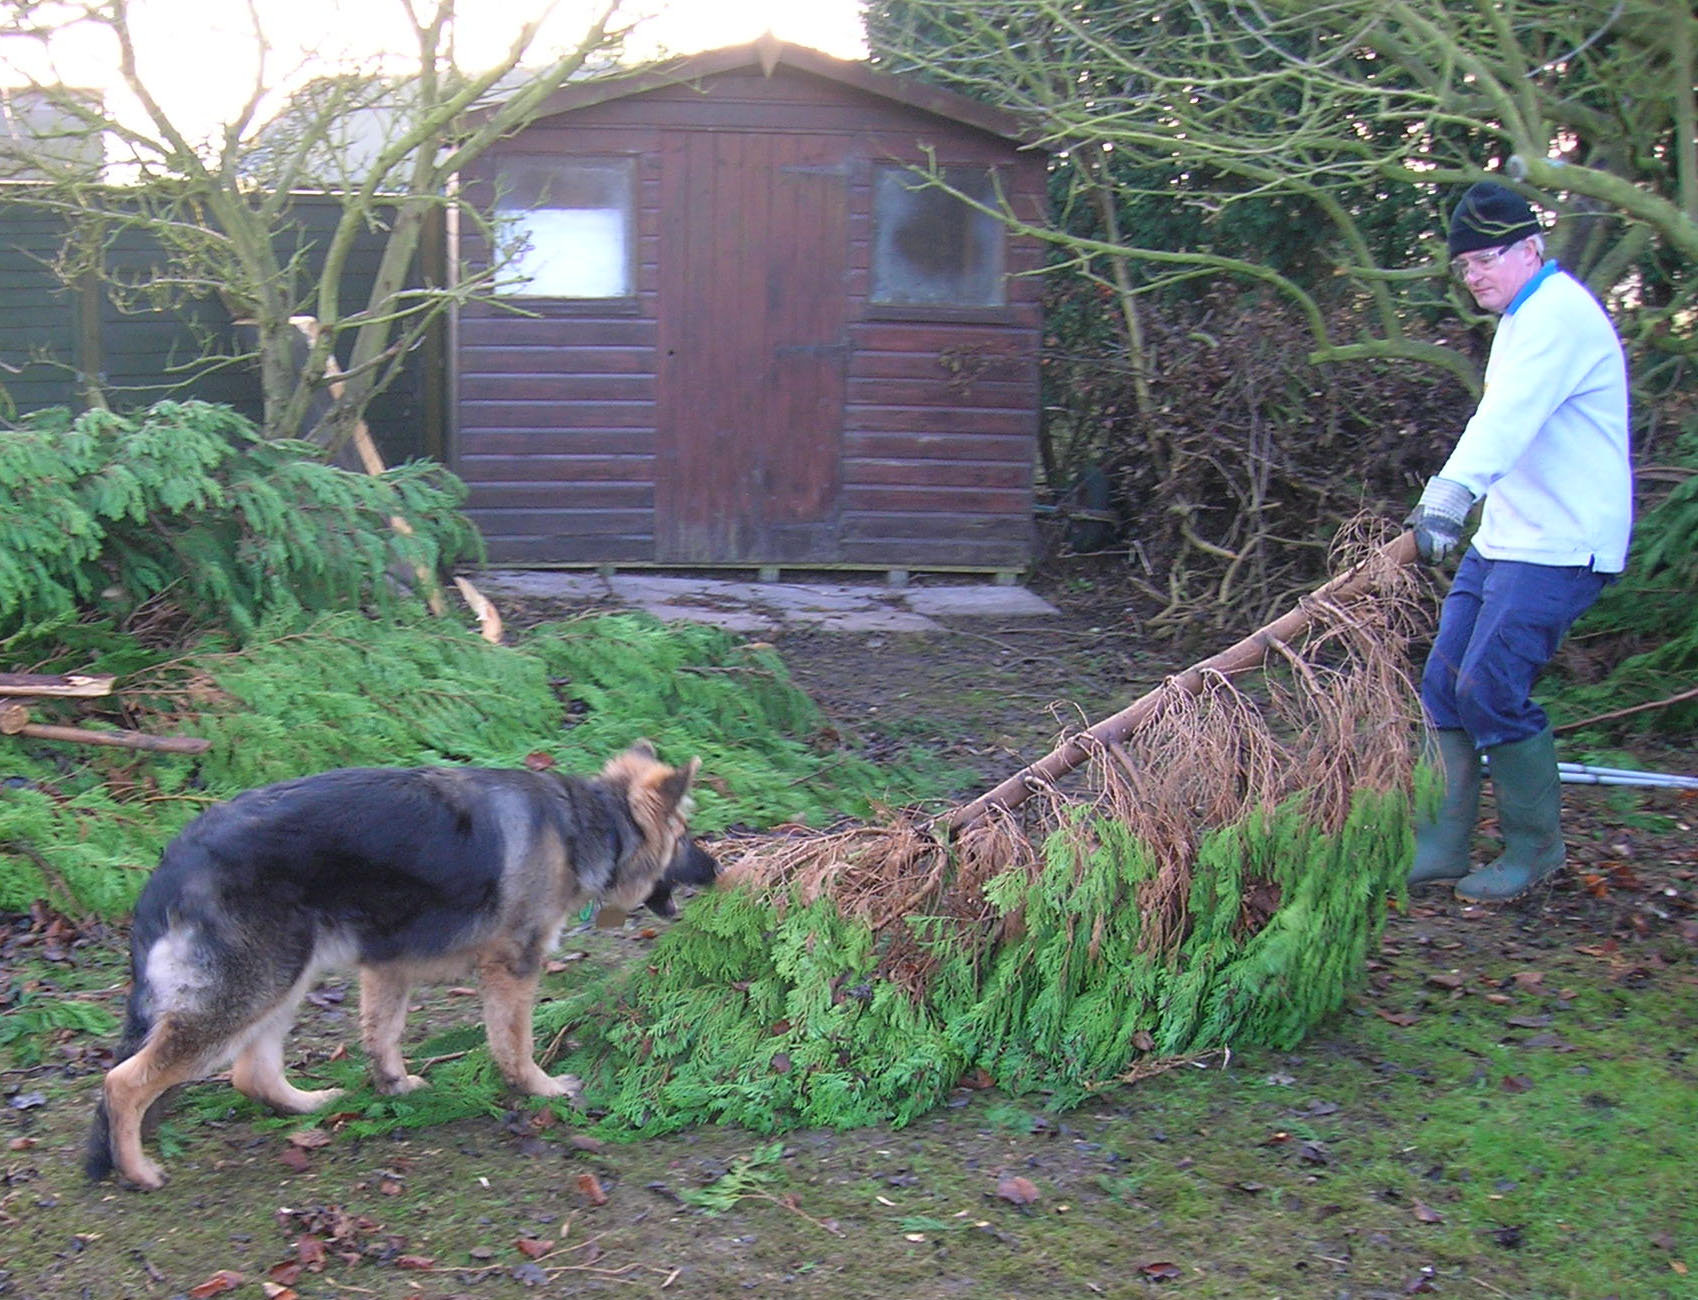 Puppy tugging at end of cut tree branch